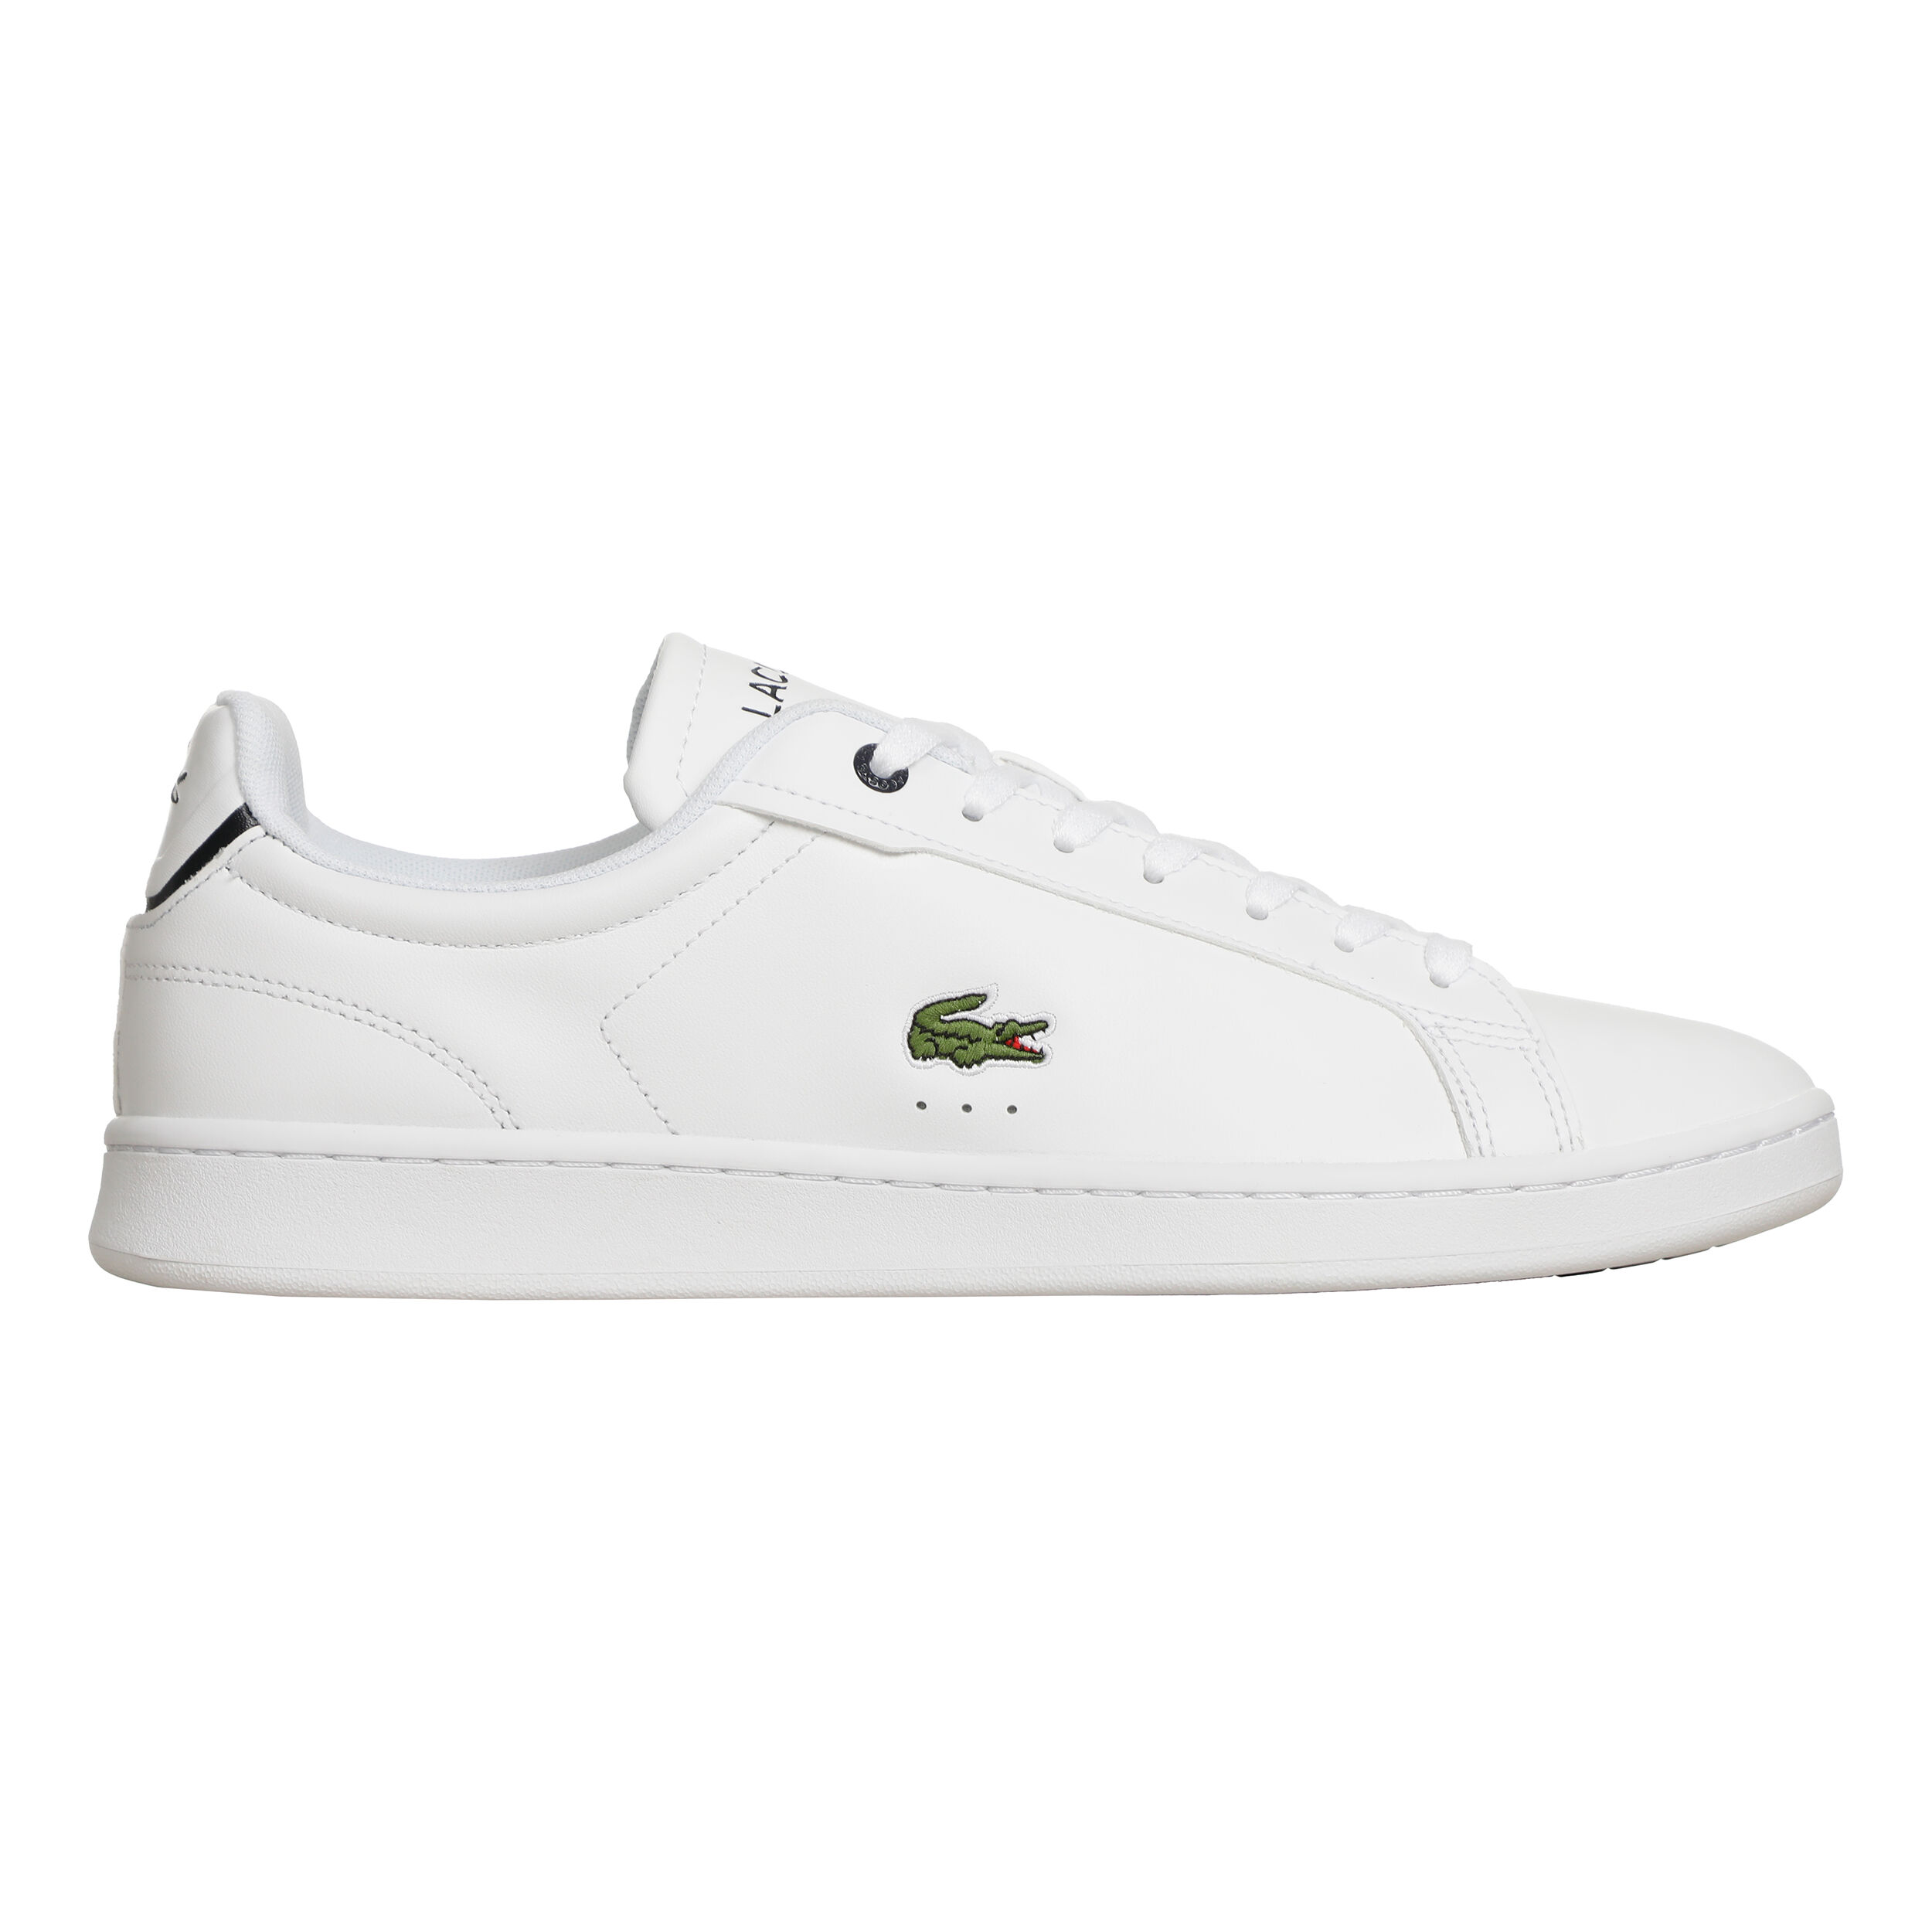 Lacoste Sneakers | Roland-Garros Store